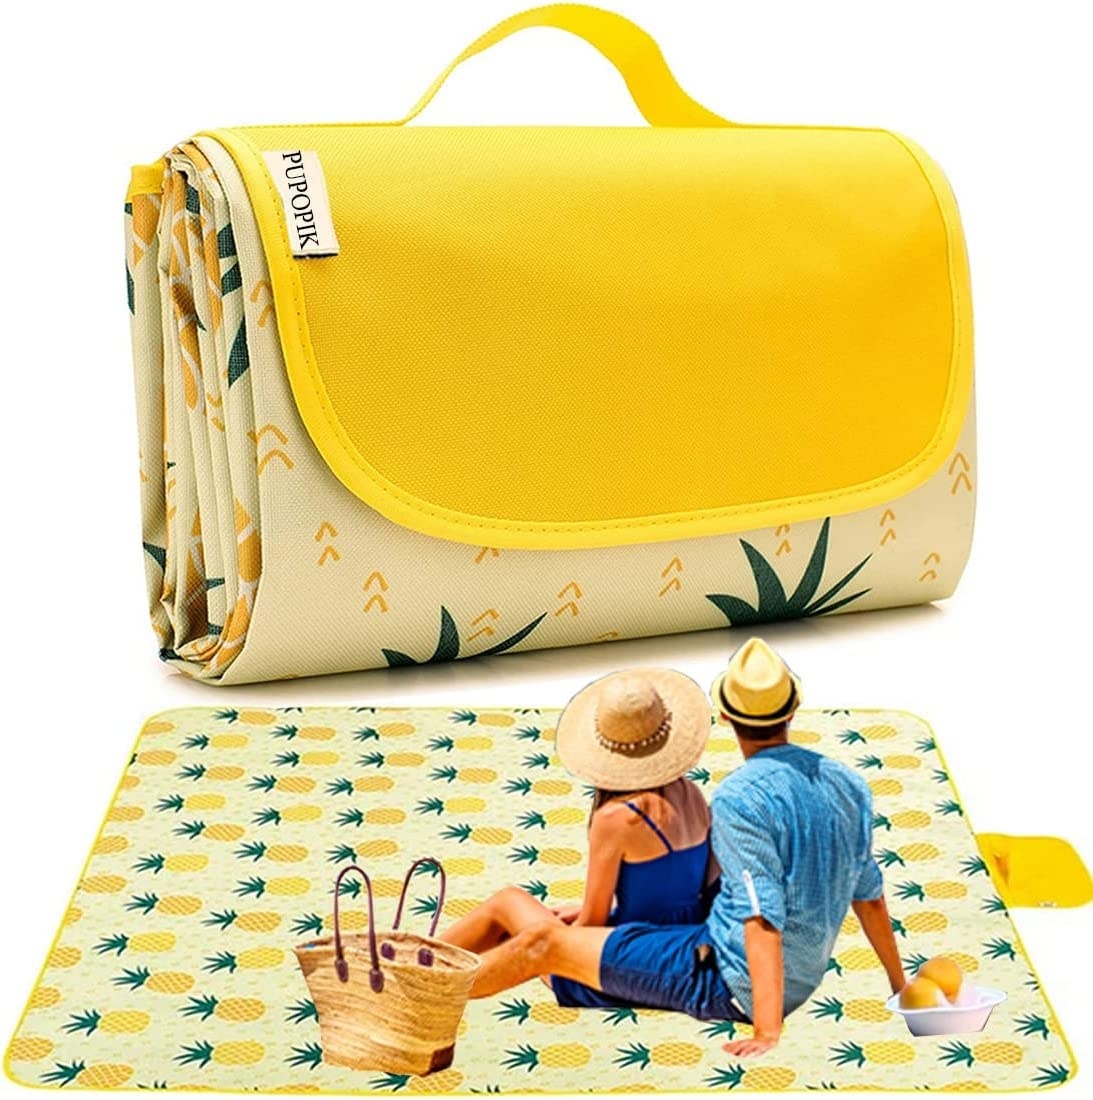 A couple sits on a large outdoor mat with pineapple print